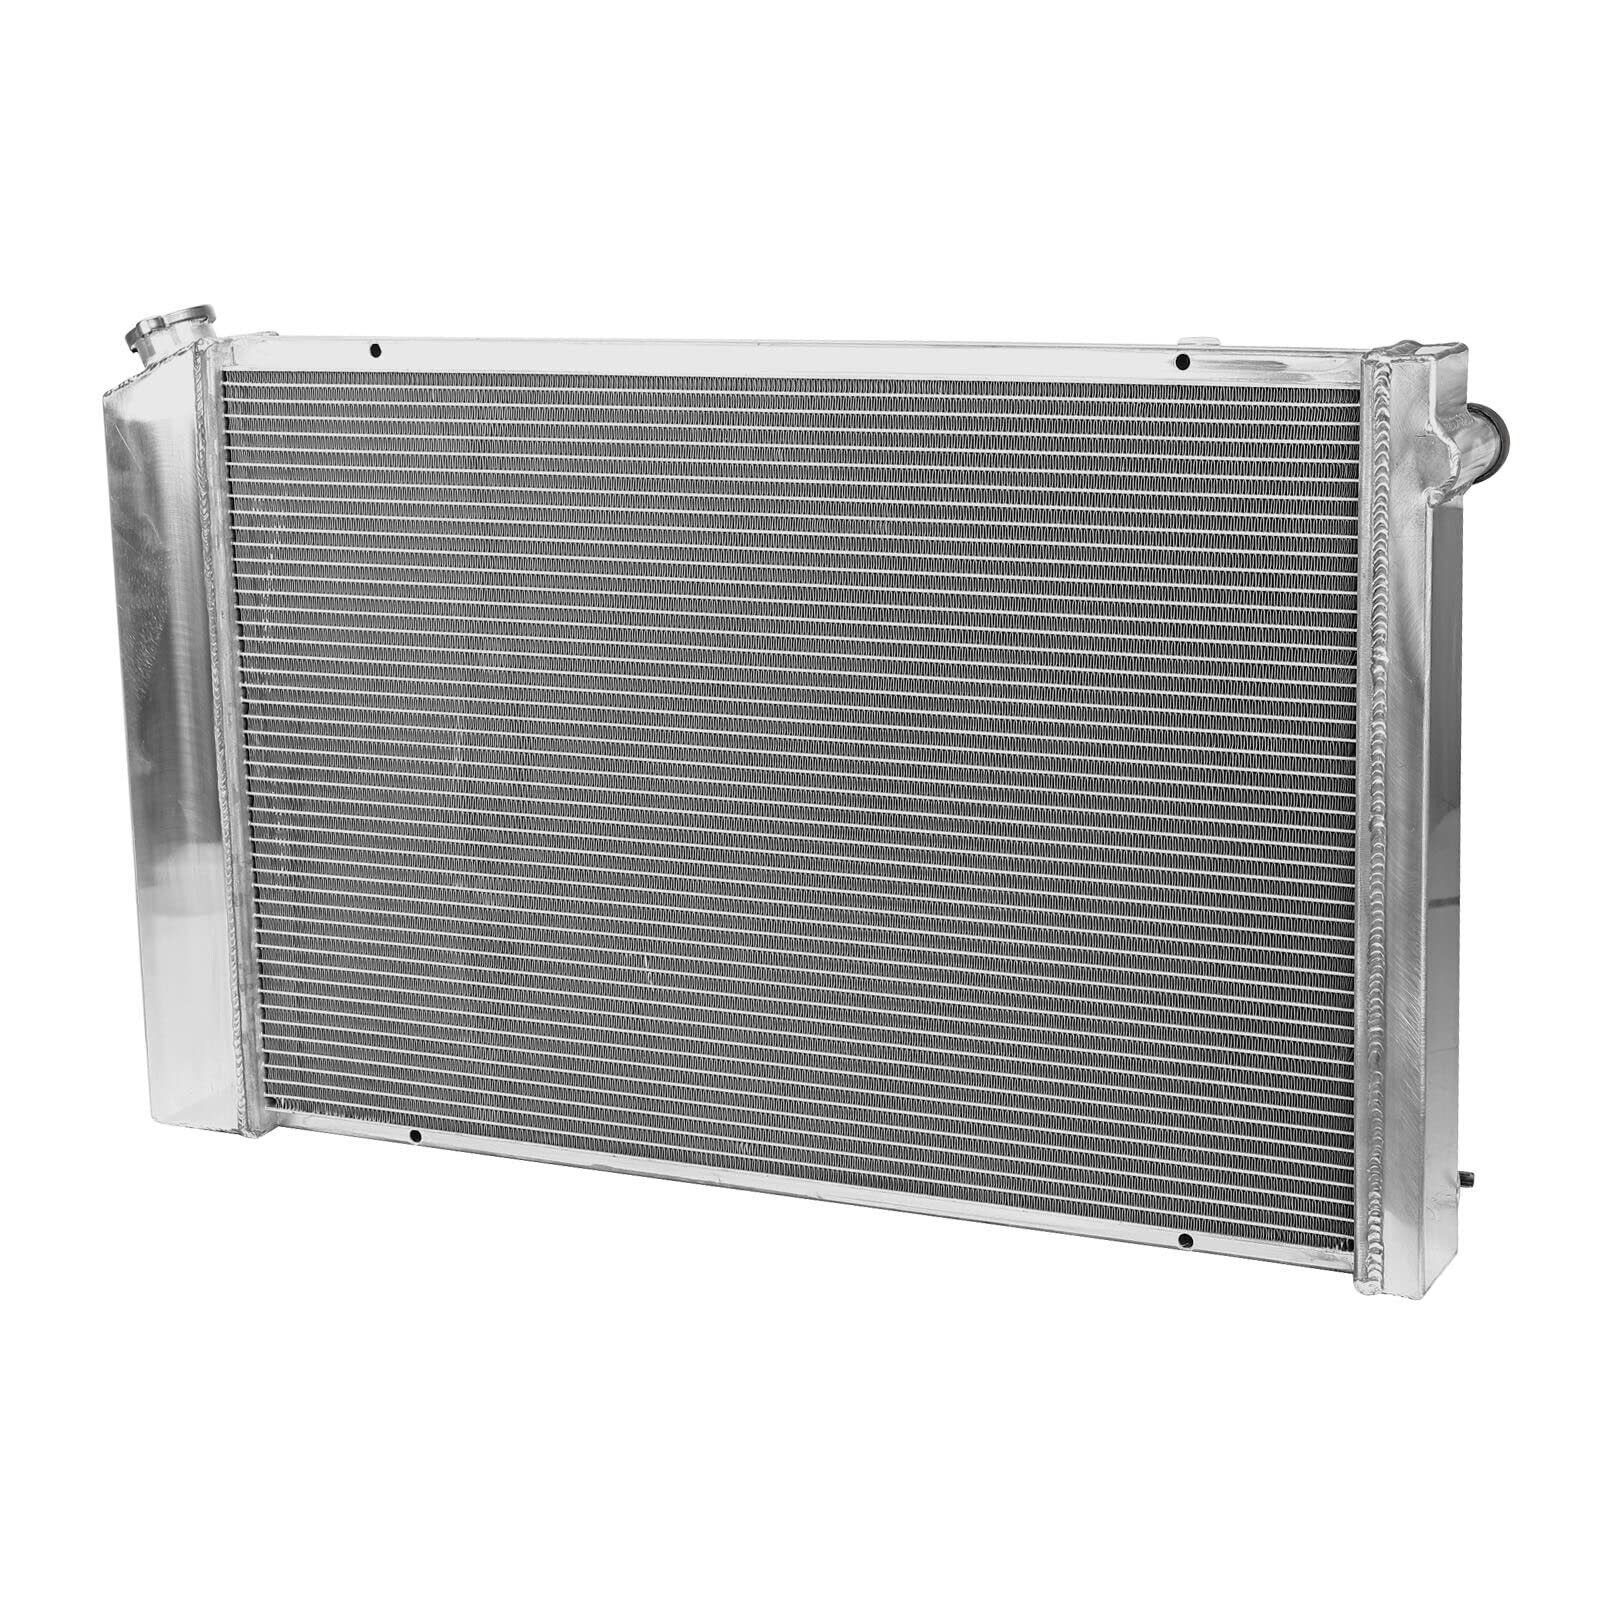 Primary image for 3 Row AA5052 Aluminum Radiator Shroud Fan Compatible with 1973-1987 Chevy C/K C1